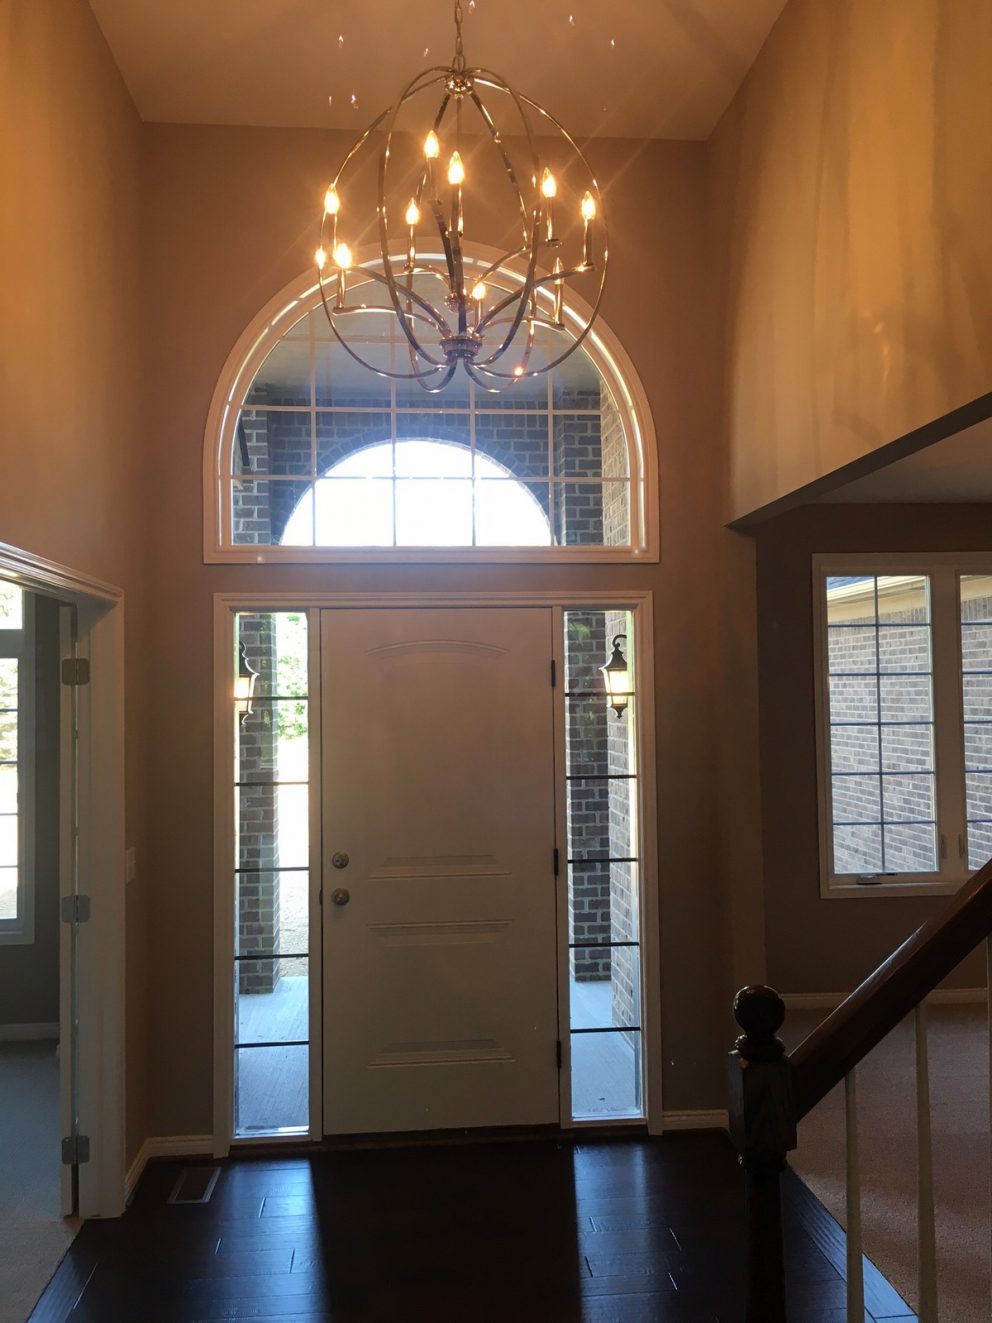 Foyer with high ceilings and chandelier